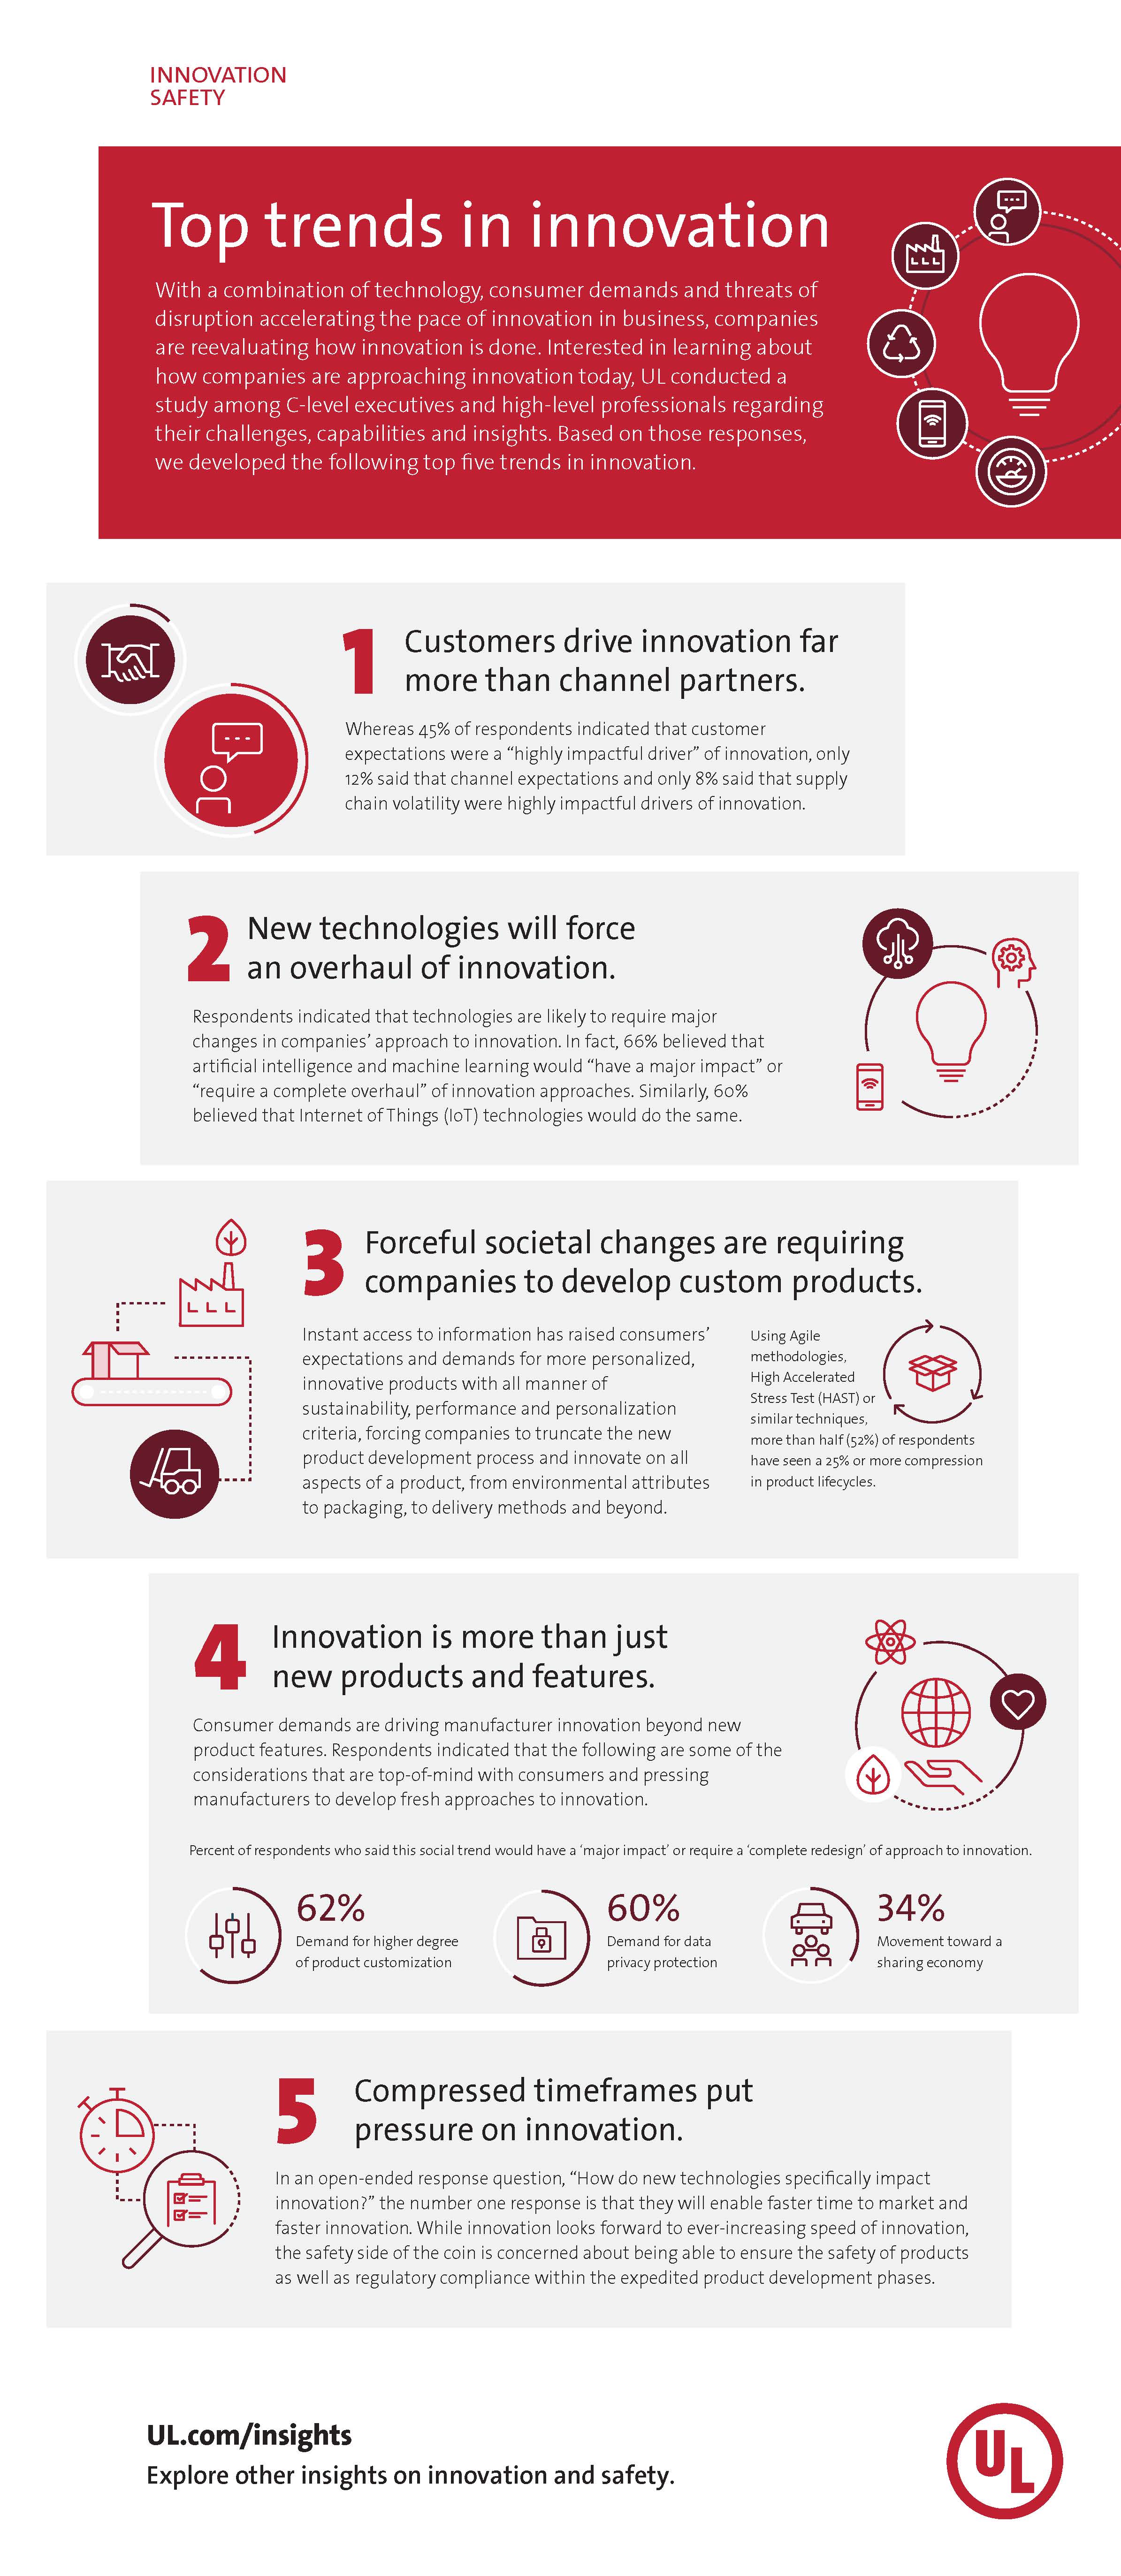 Top trends in innovation